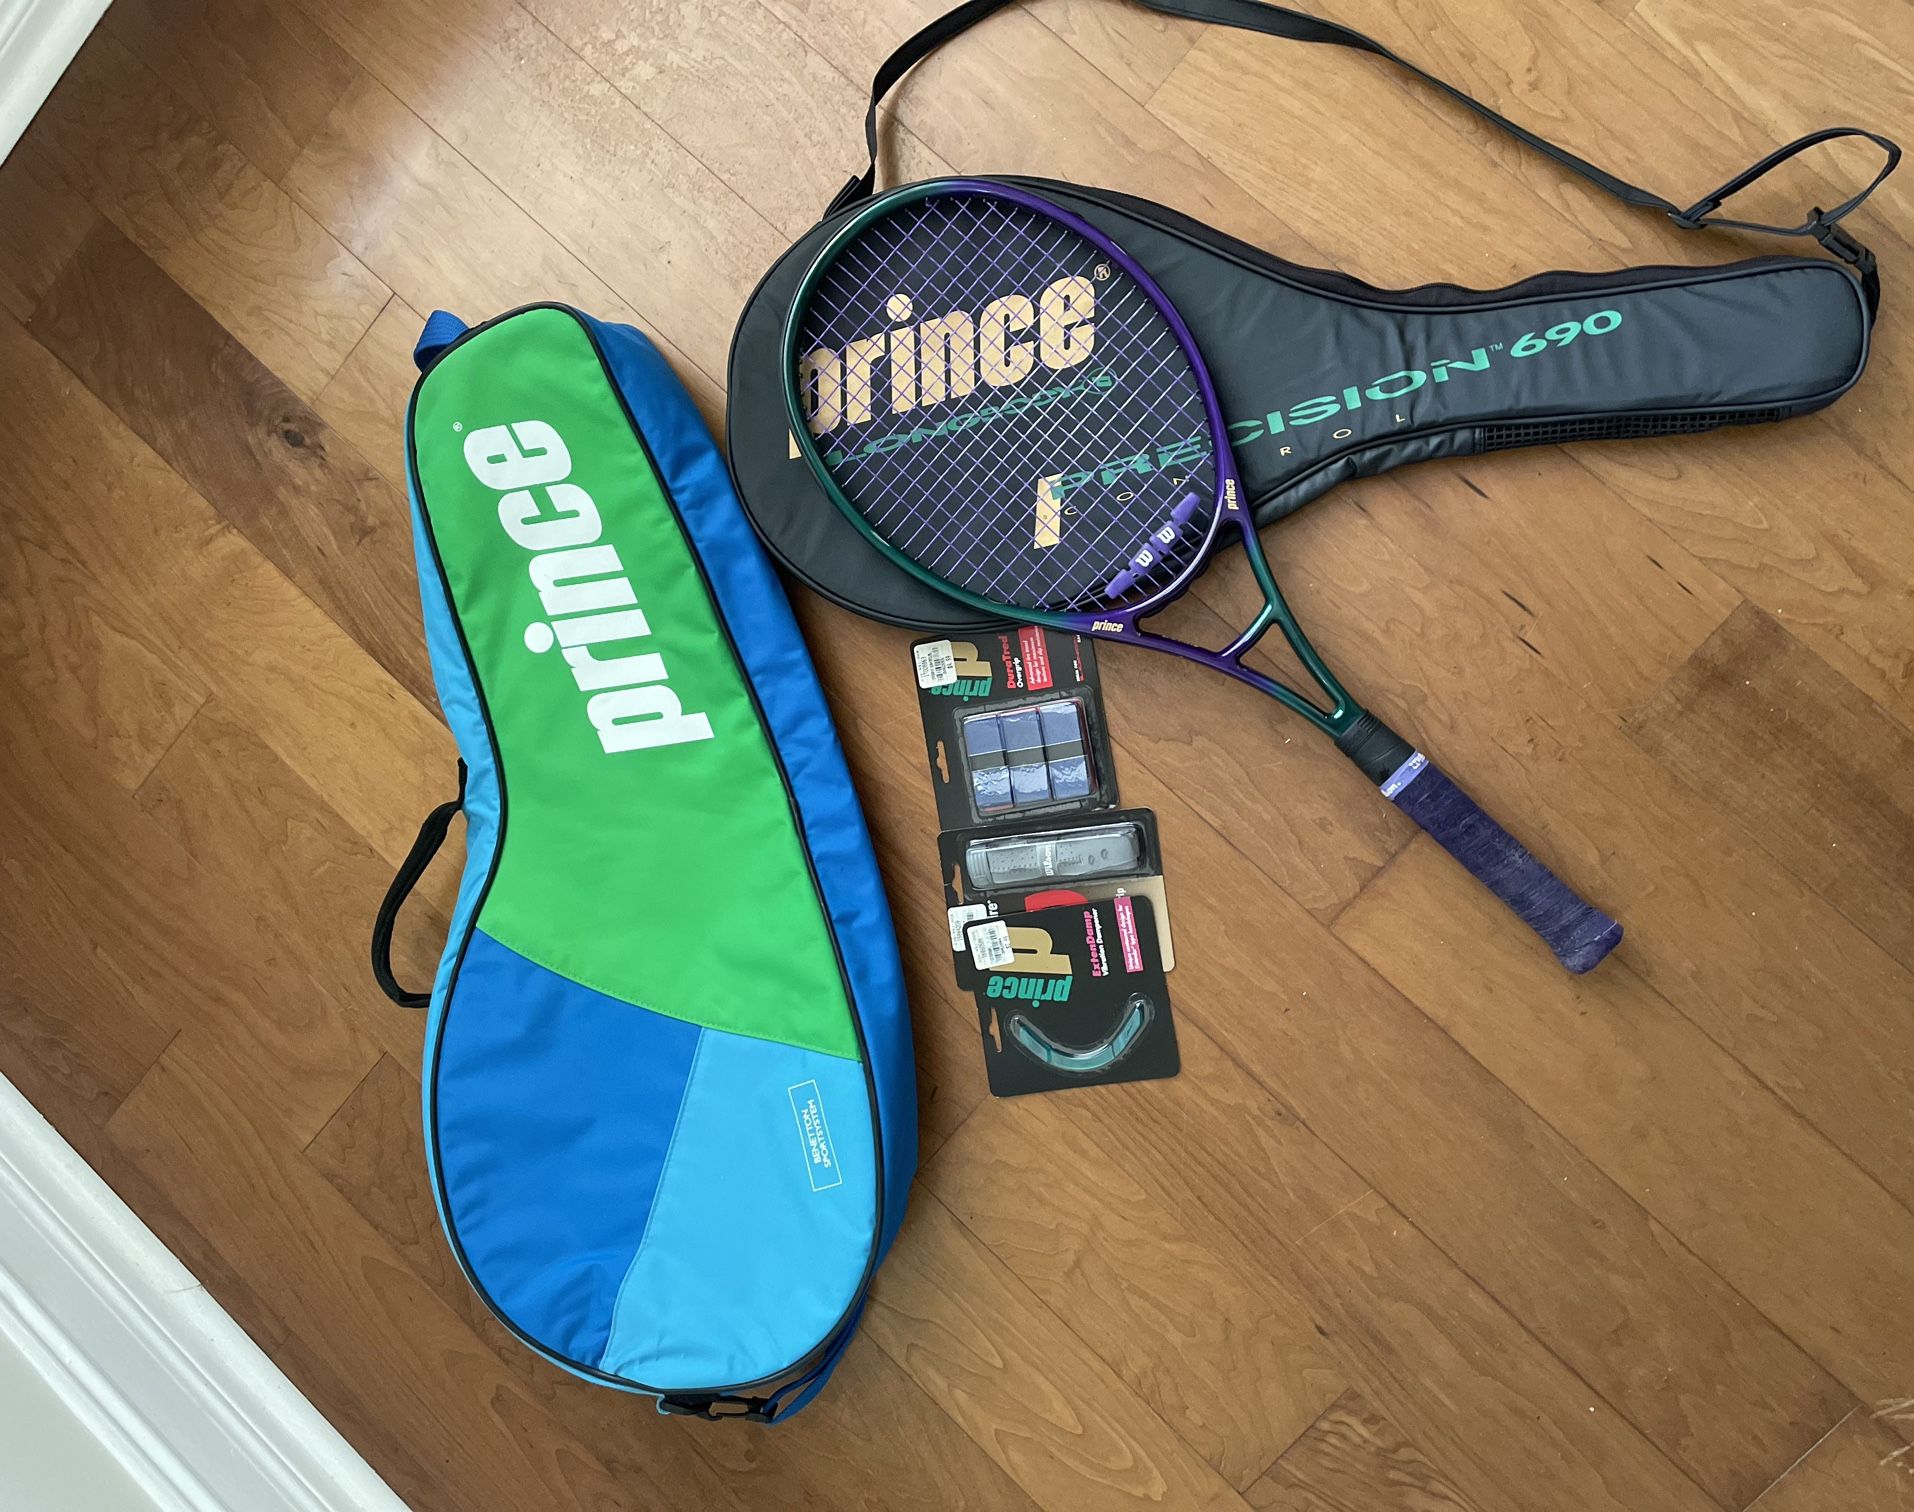 Prince Precision 690 Longbody 1/2 Tennis Racket And Bag With Accessories 